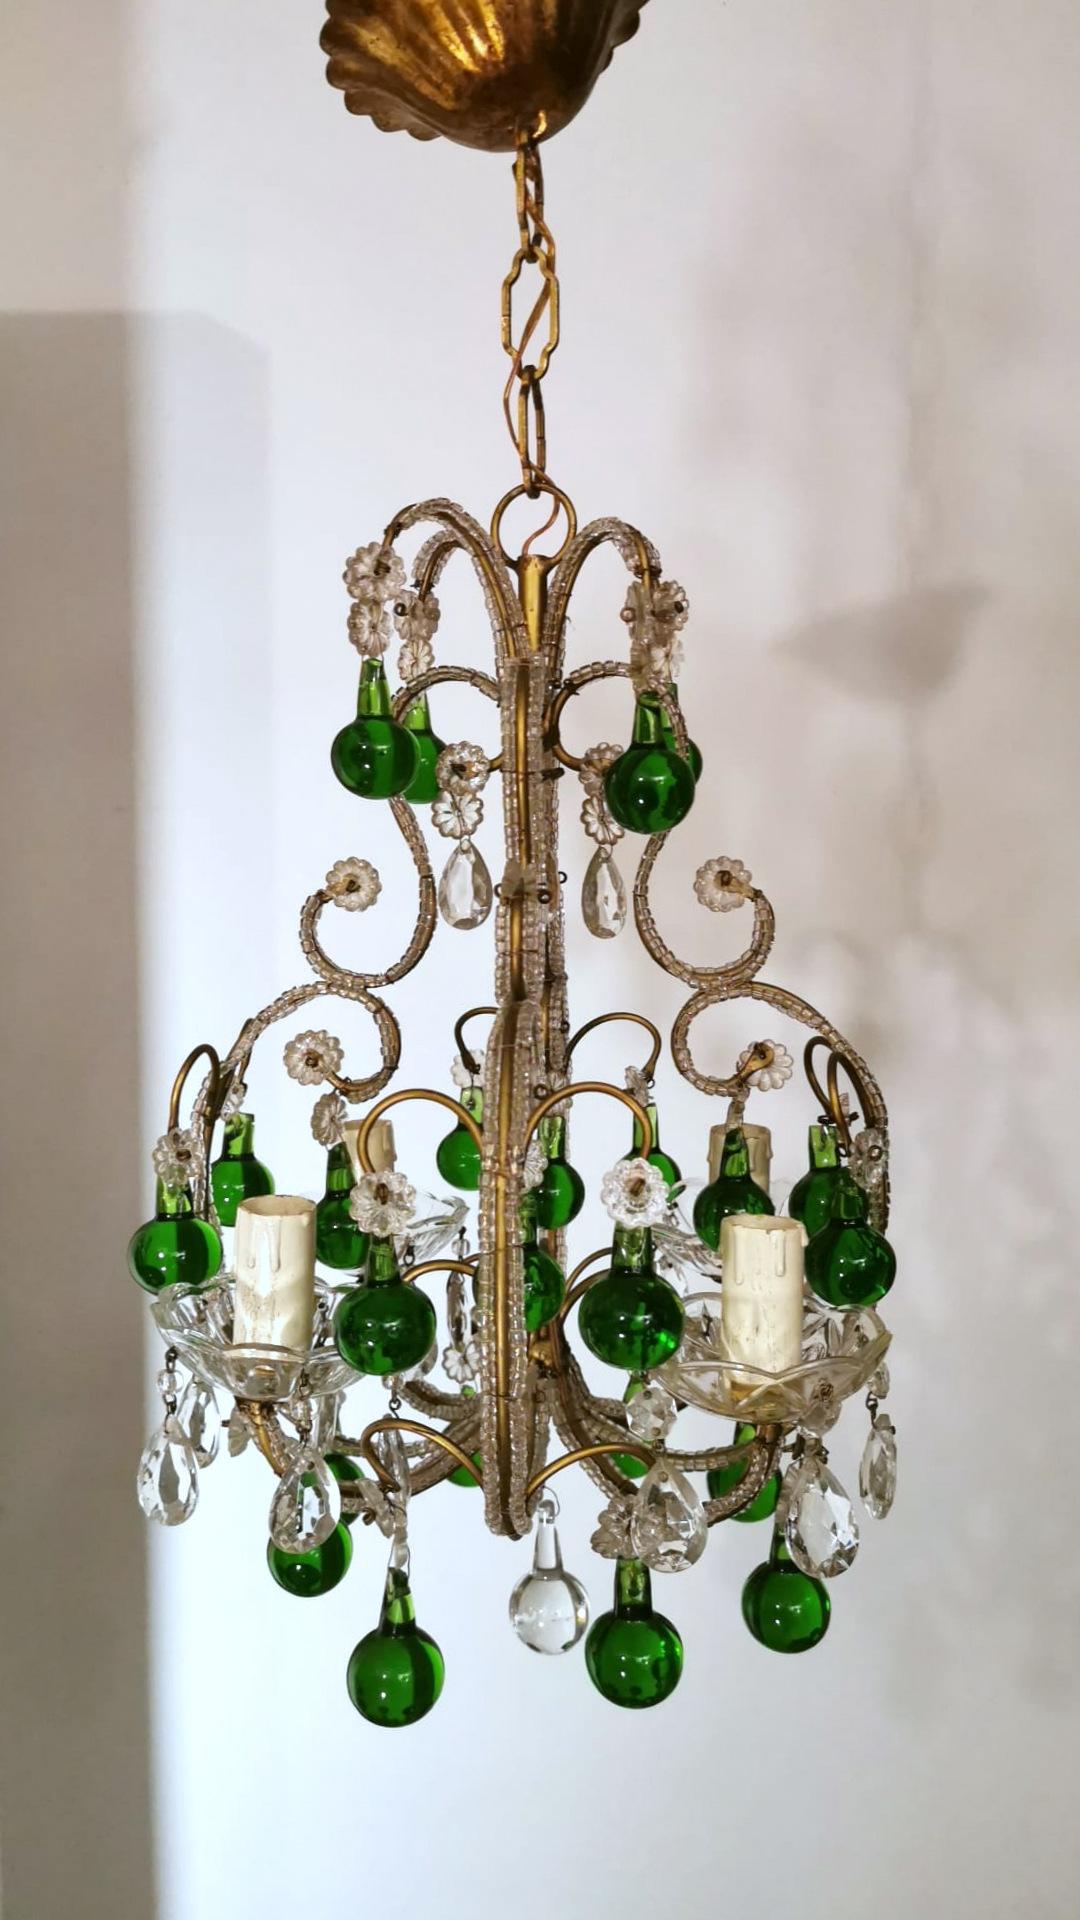 Florentine Craftsmanship Italian Brass Chandelier with Crystals and Green Glasse In Good Condition In Prato, Tuscany